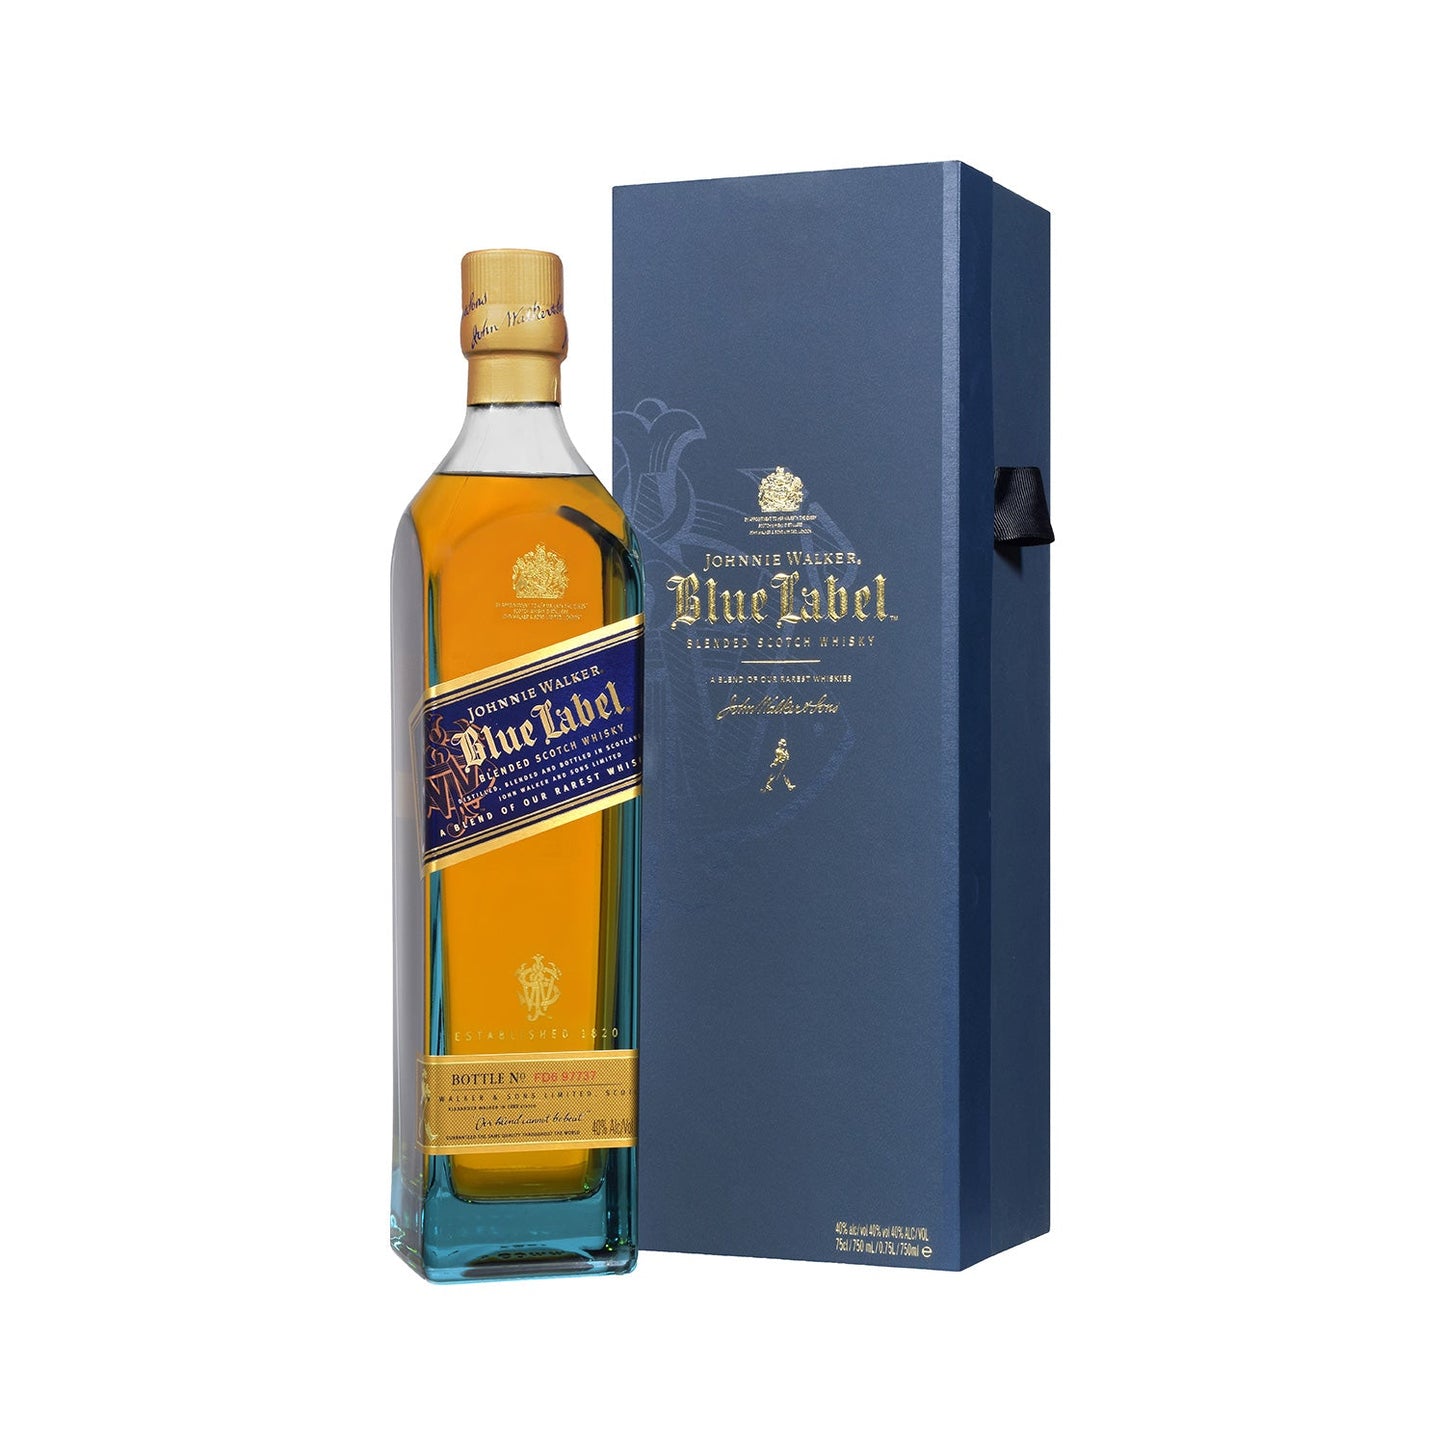 Johnnie Walker Blue Label with Gift Box. 1 L